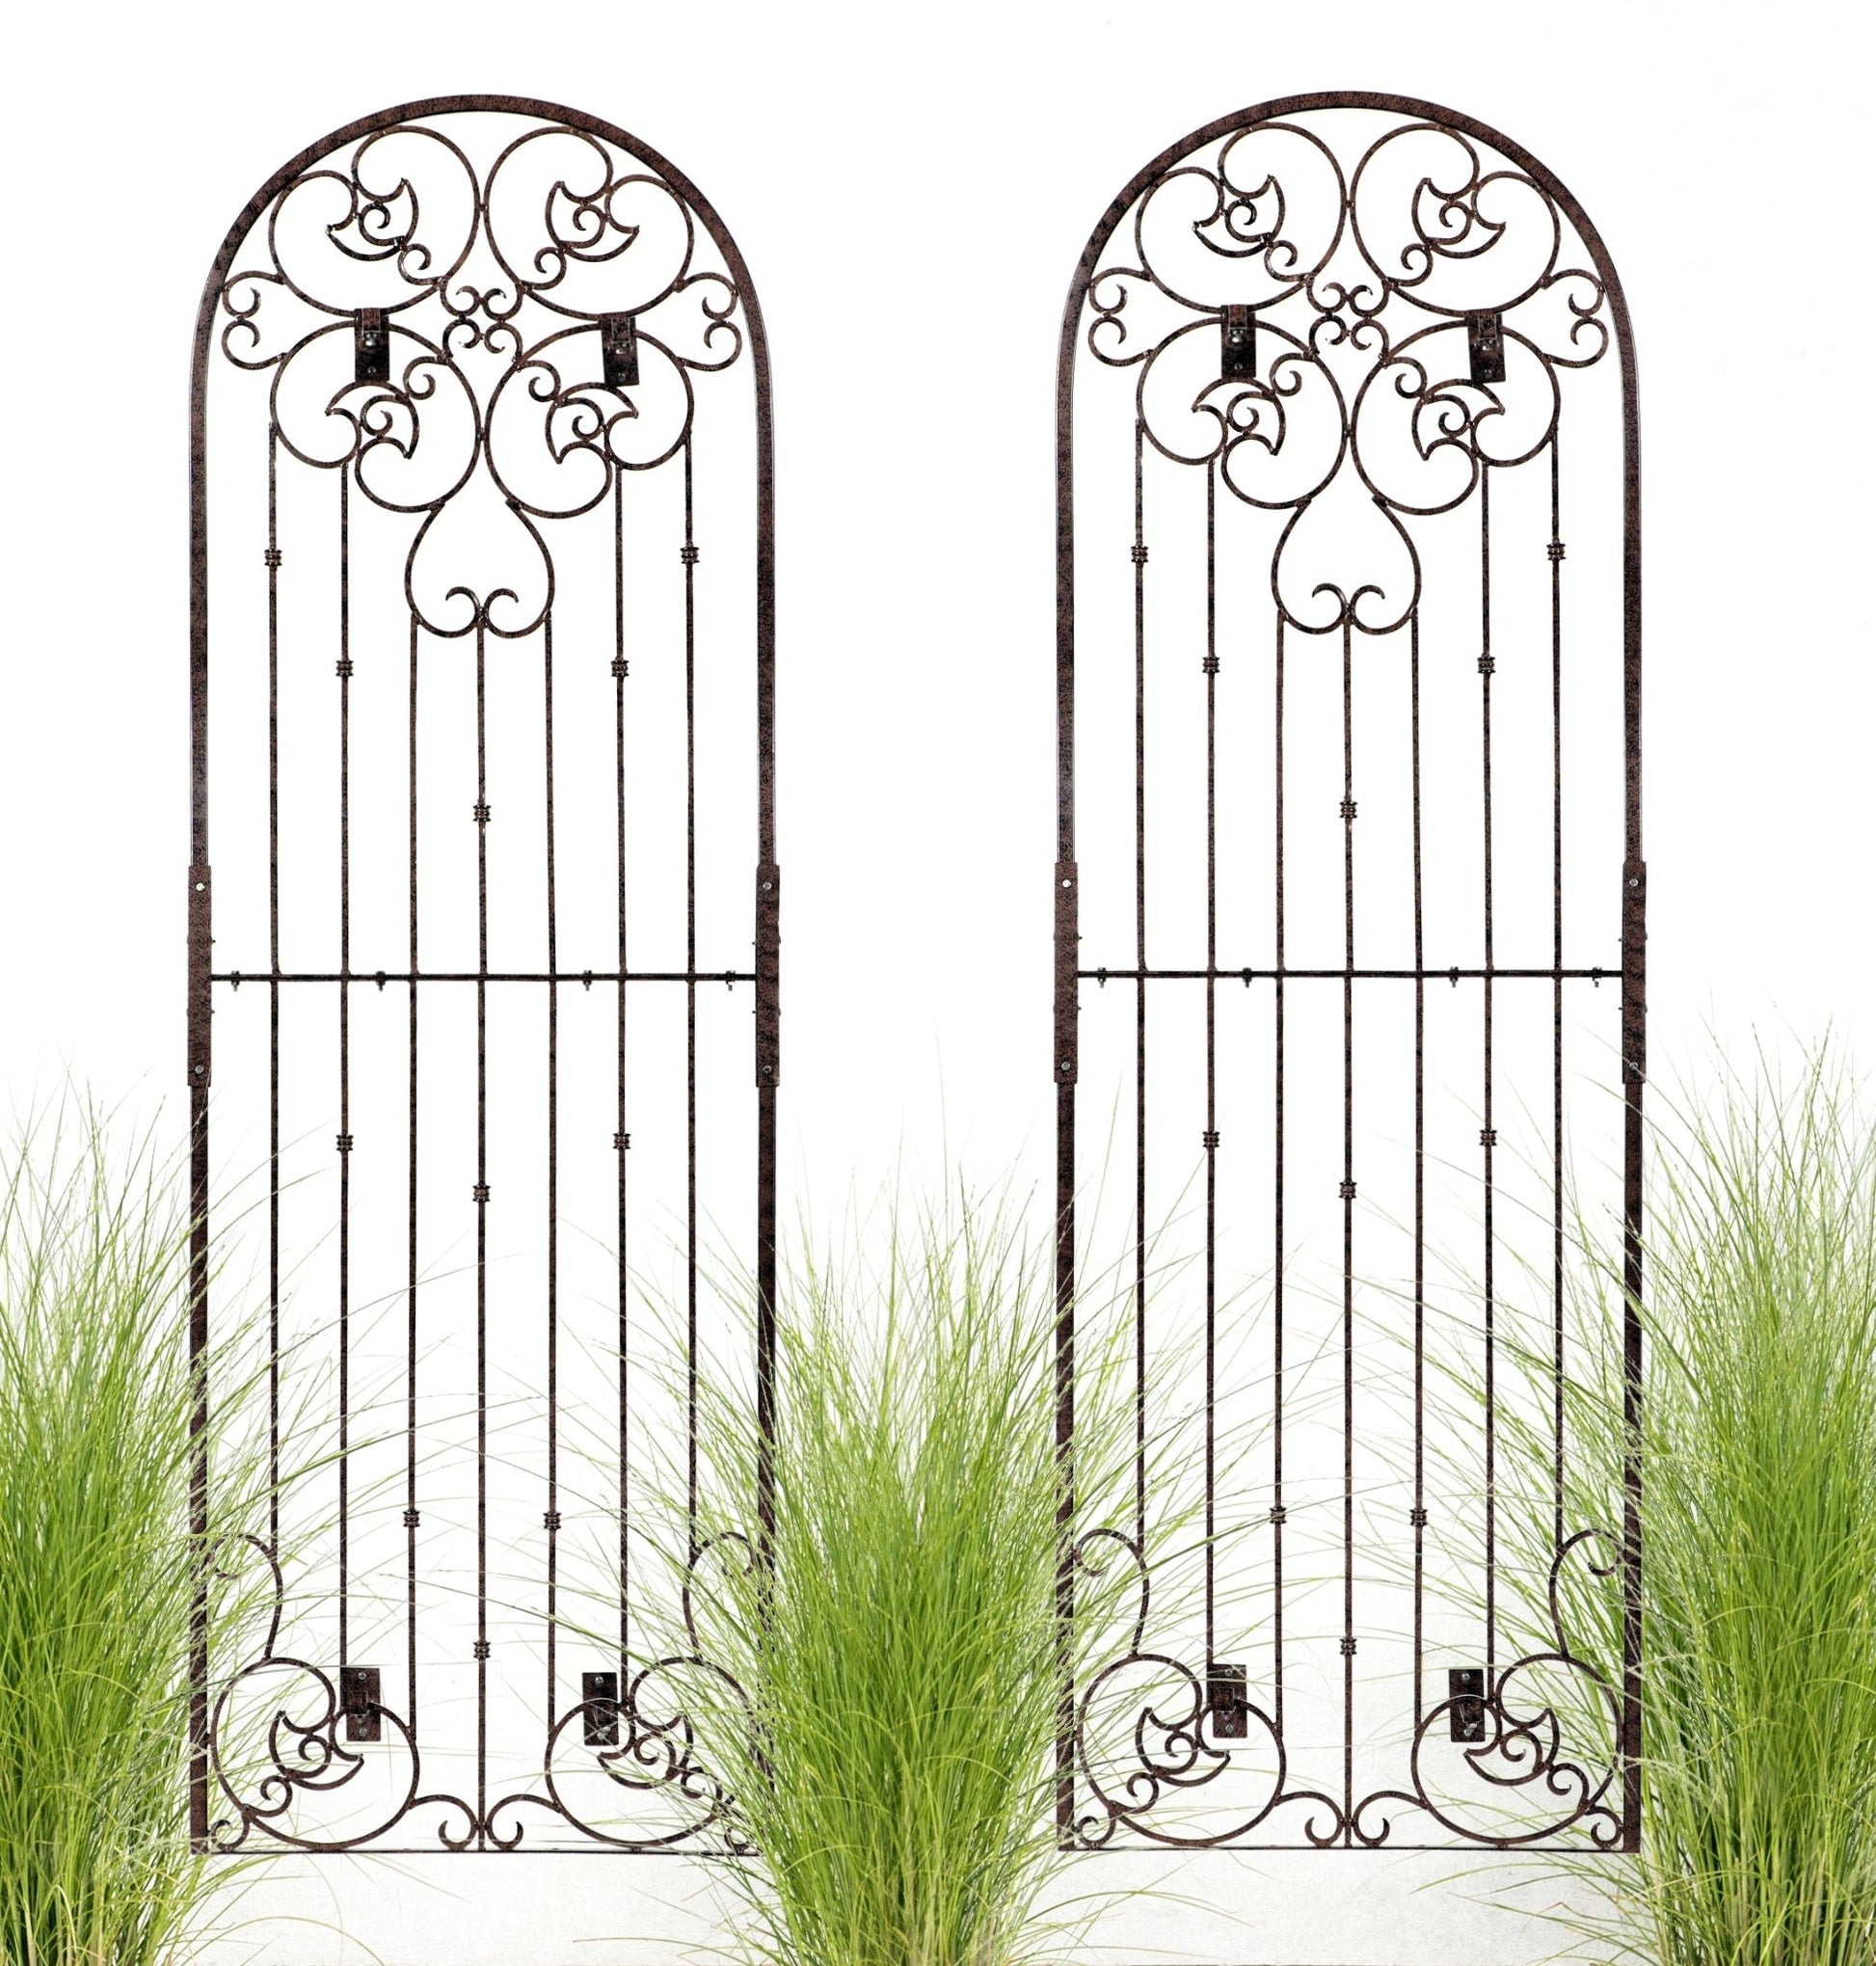 H Potter Set of 2 Wall Trellises 8 ft Wrought Iron Ornamental Metal with 4 Wall Brackets